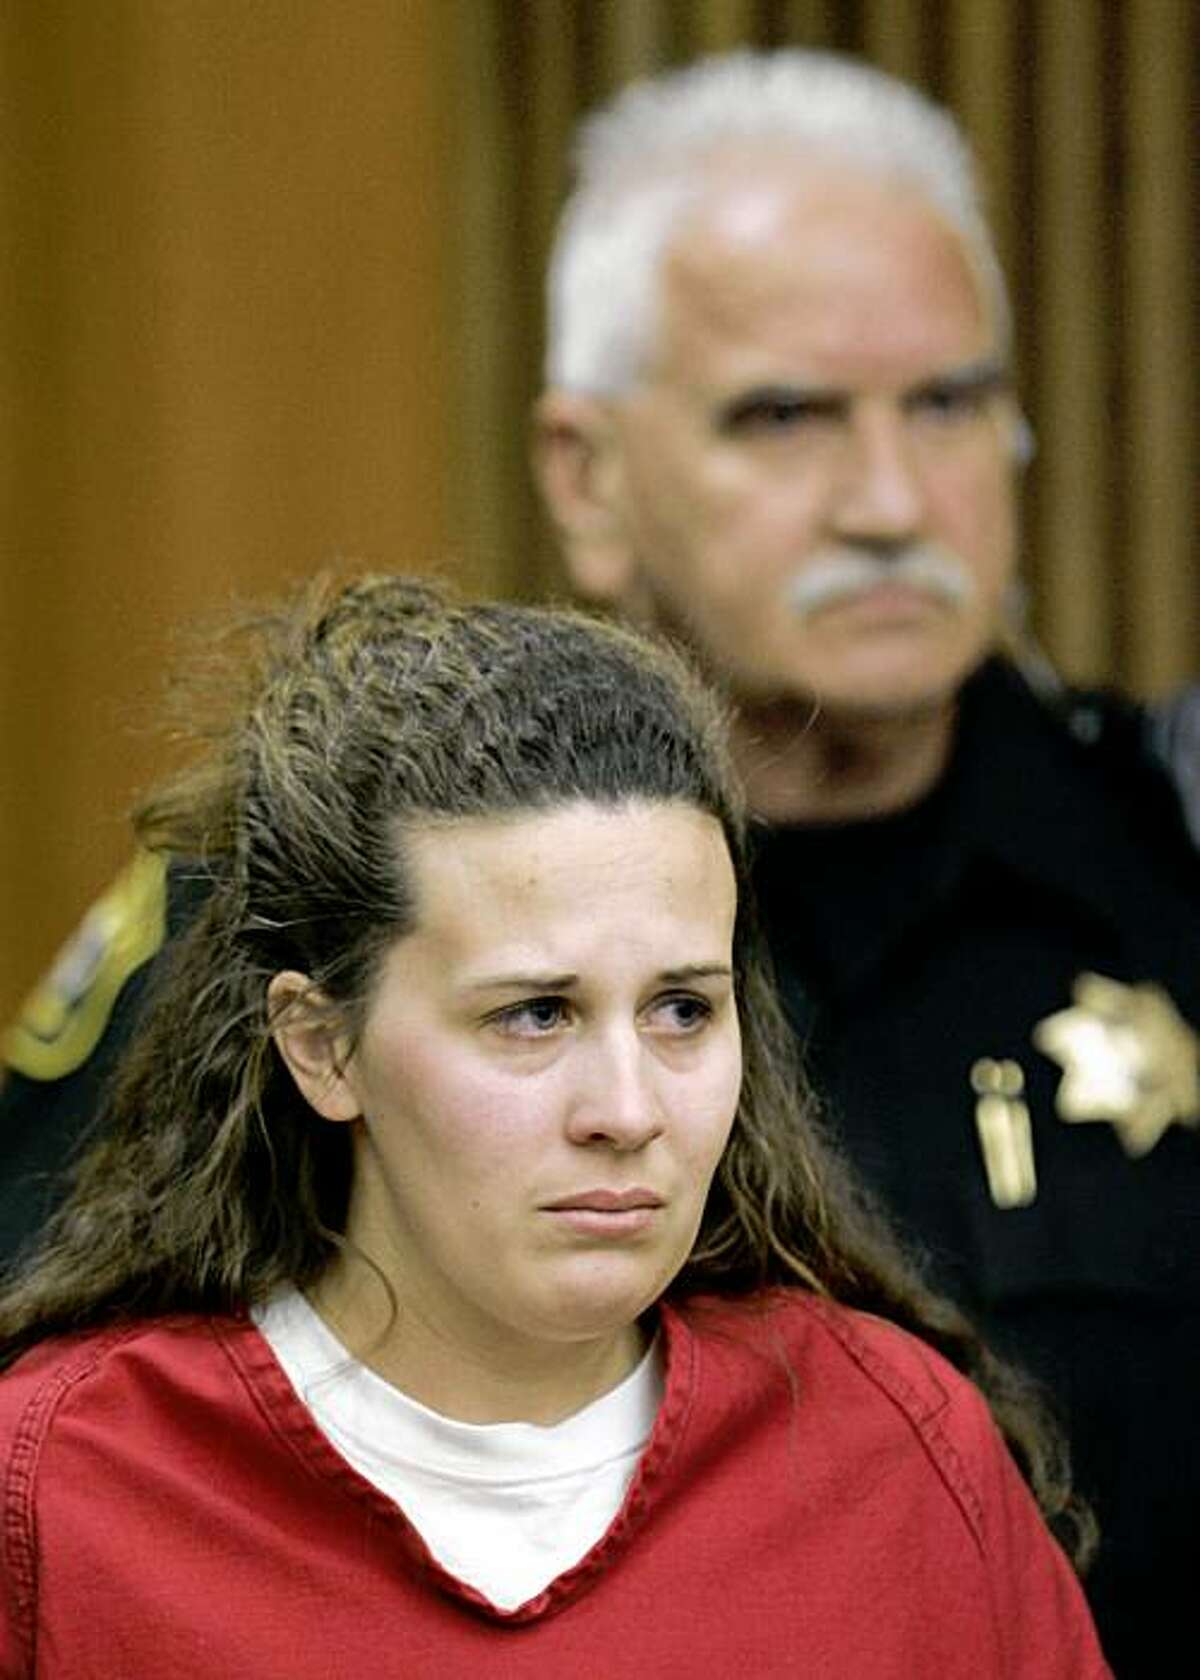 Melissa Huckaby, 28, listens in a Stockton, Calif., courtroom during her arraignment, Tuesday, April 14, 2009. Huckaby was charged with murdering her daughter's friend, 8-year-old Sandra Cantu, in a gruesome crime that has shocked and terrified residents in Tracy, a city of about 78,000 people, 60 miles east of San Francisco. (AP Photo/Paul Sakuma, Pool)